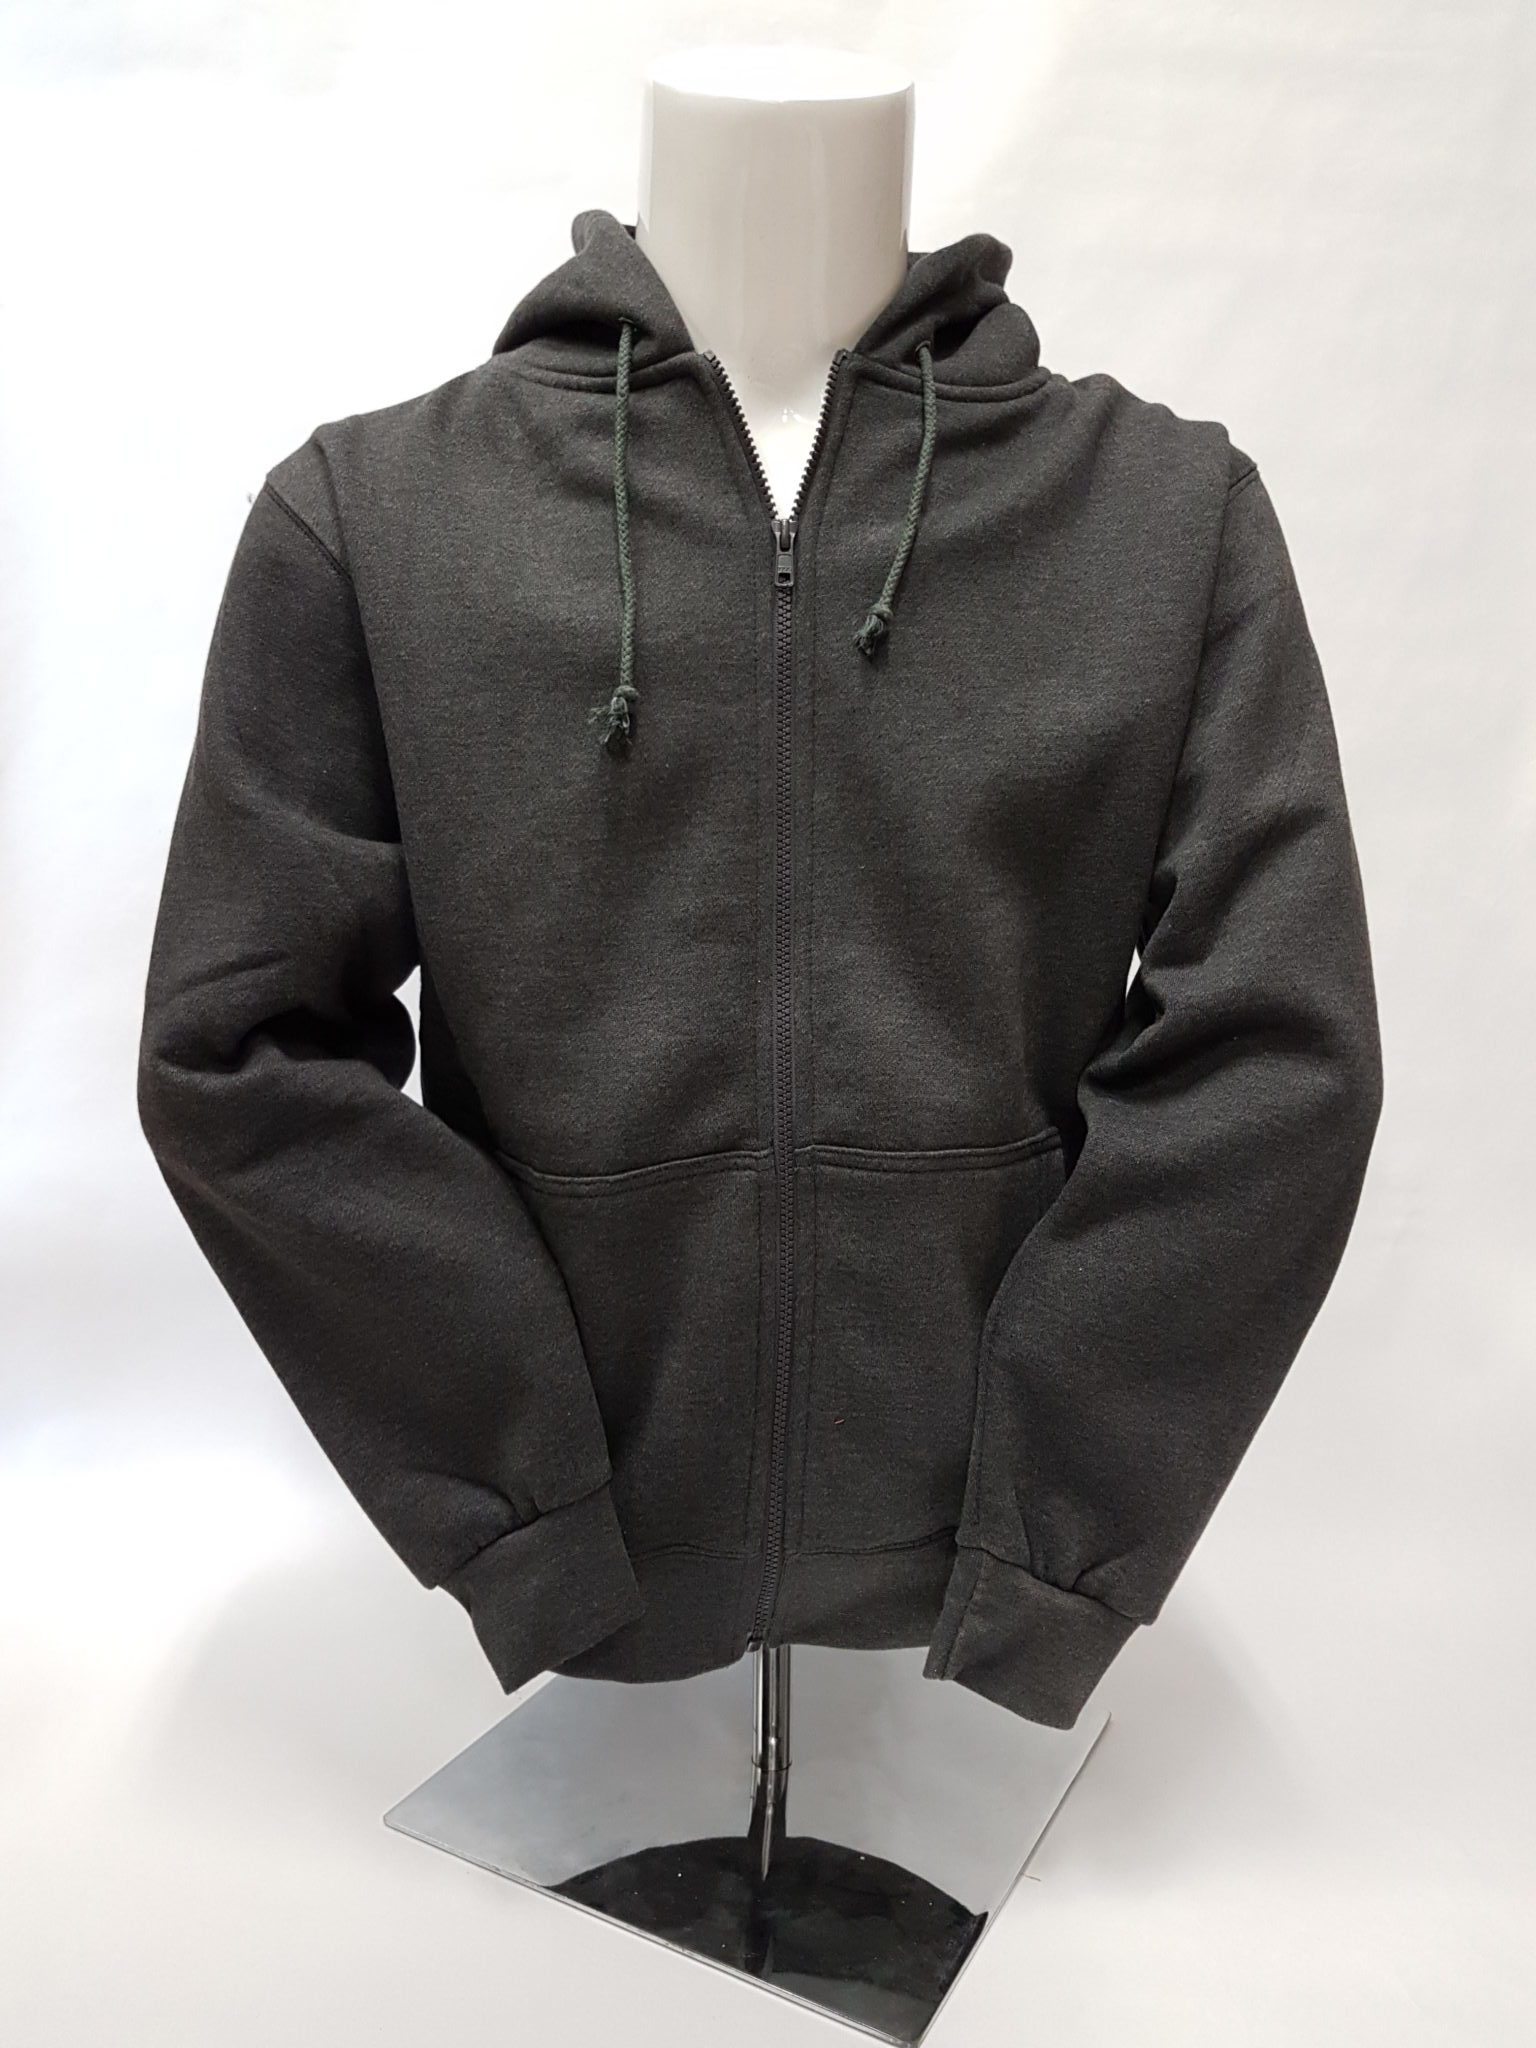 606 – Adult Full Zip Hoody | Customizable sports and safety wear 